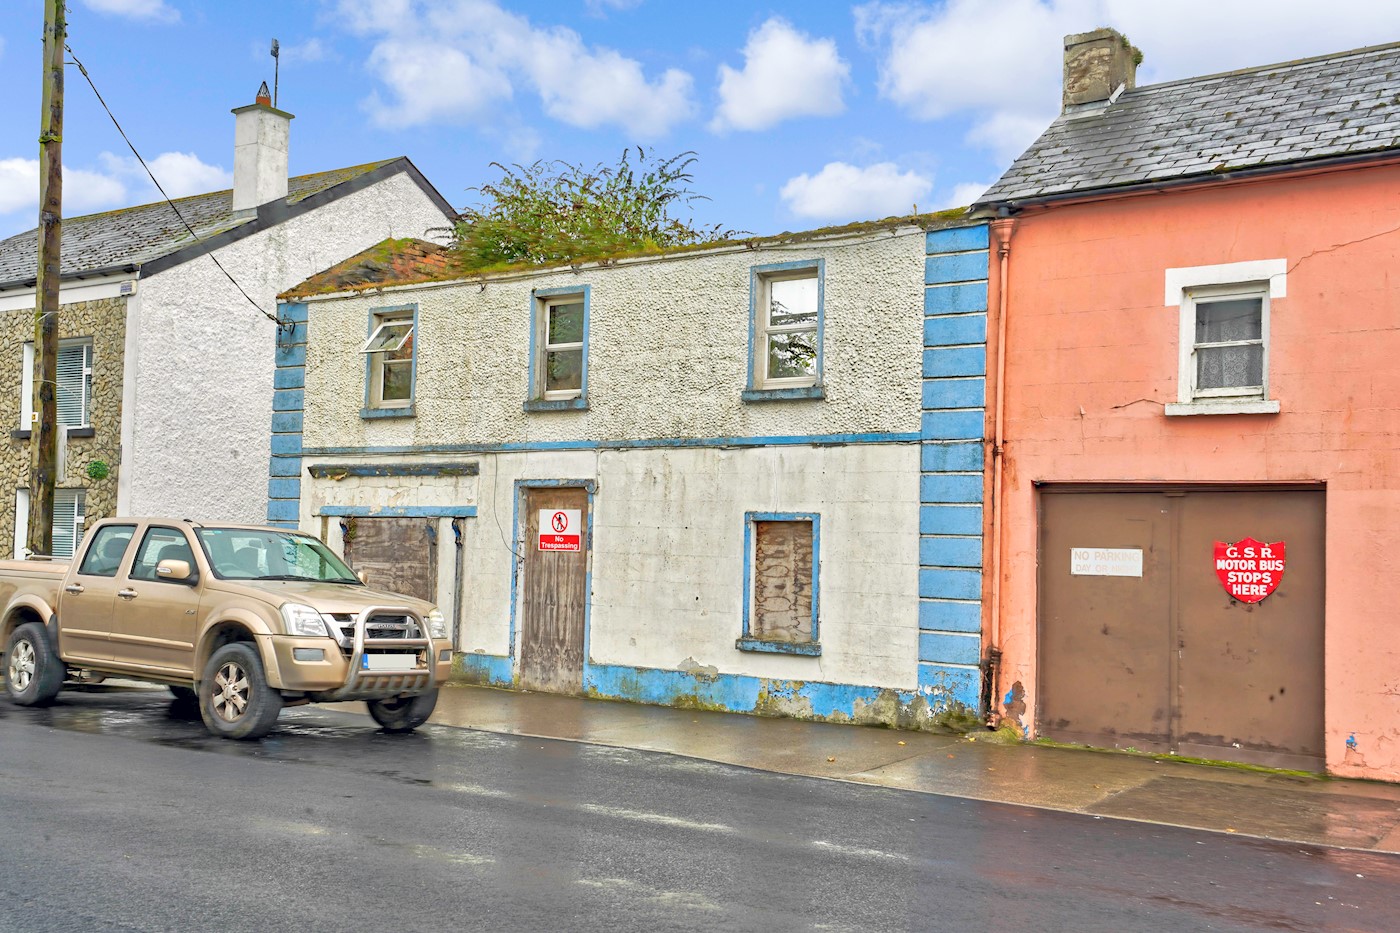 Residential and Commercial Unit, Main Street, Ballylynan, Co. Laois 1/3